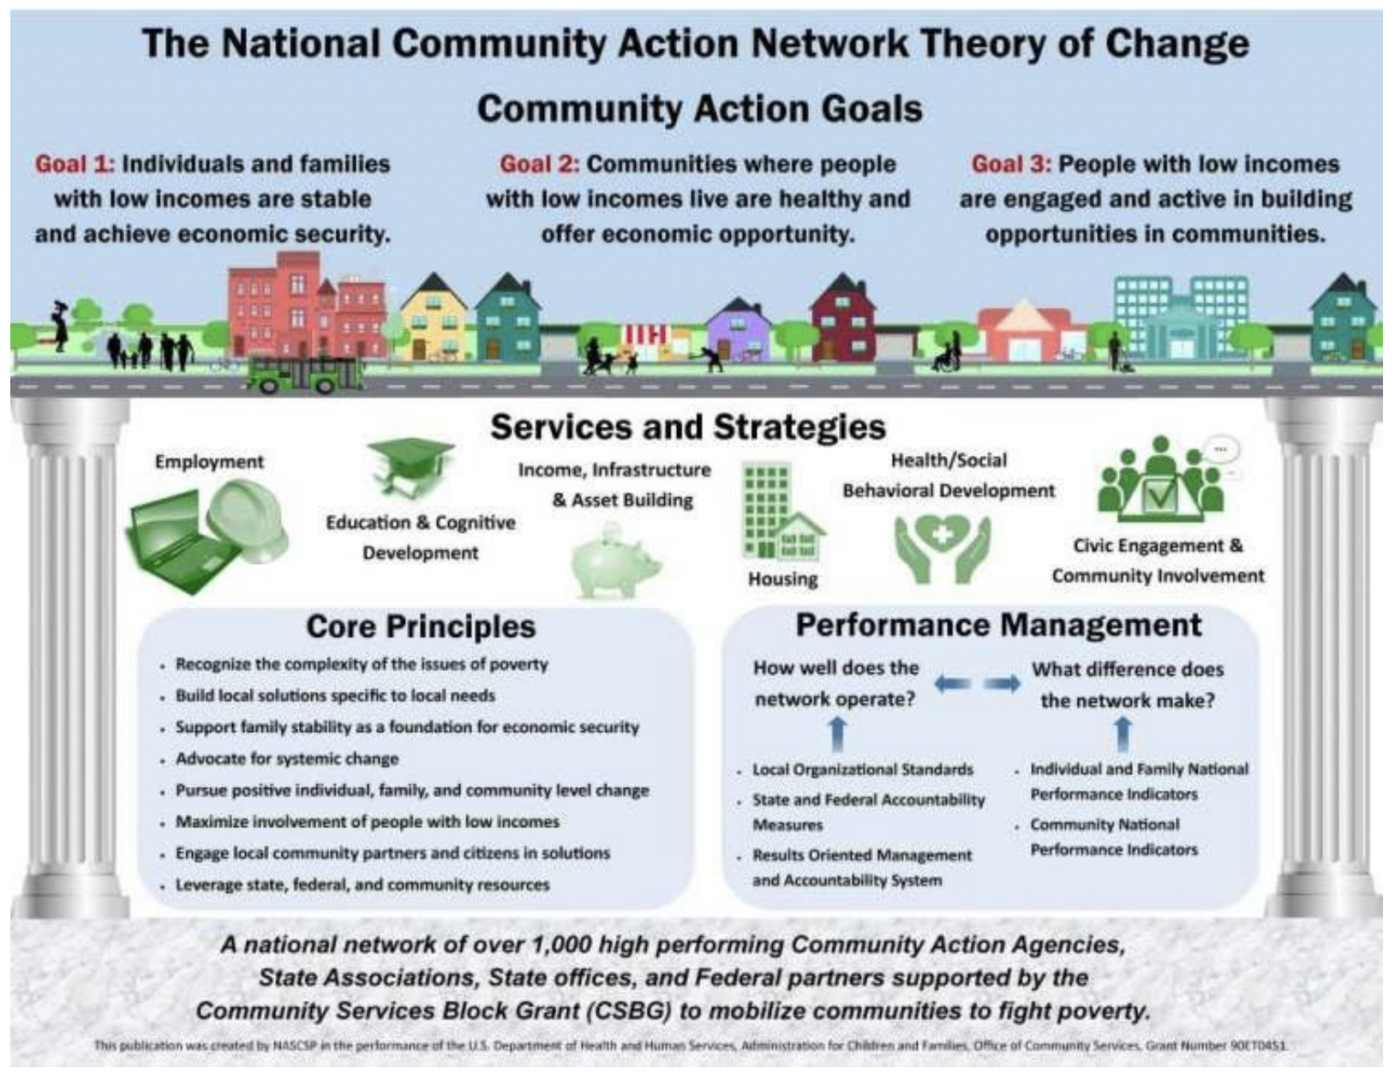 UPO "The National Community Action Network Theory of Change Community Action Goals"